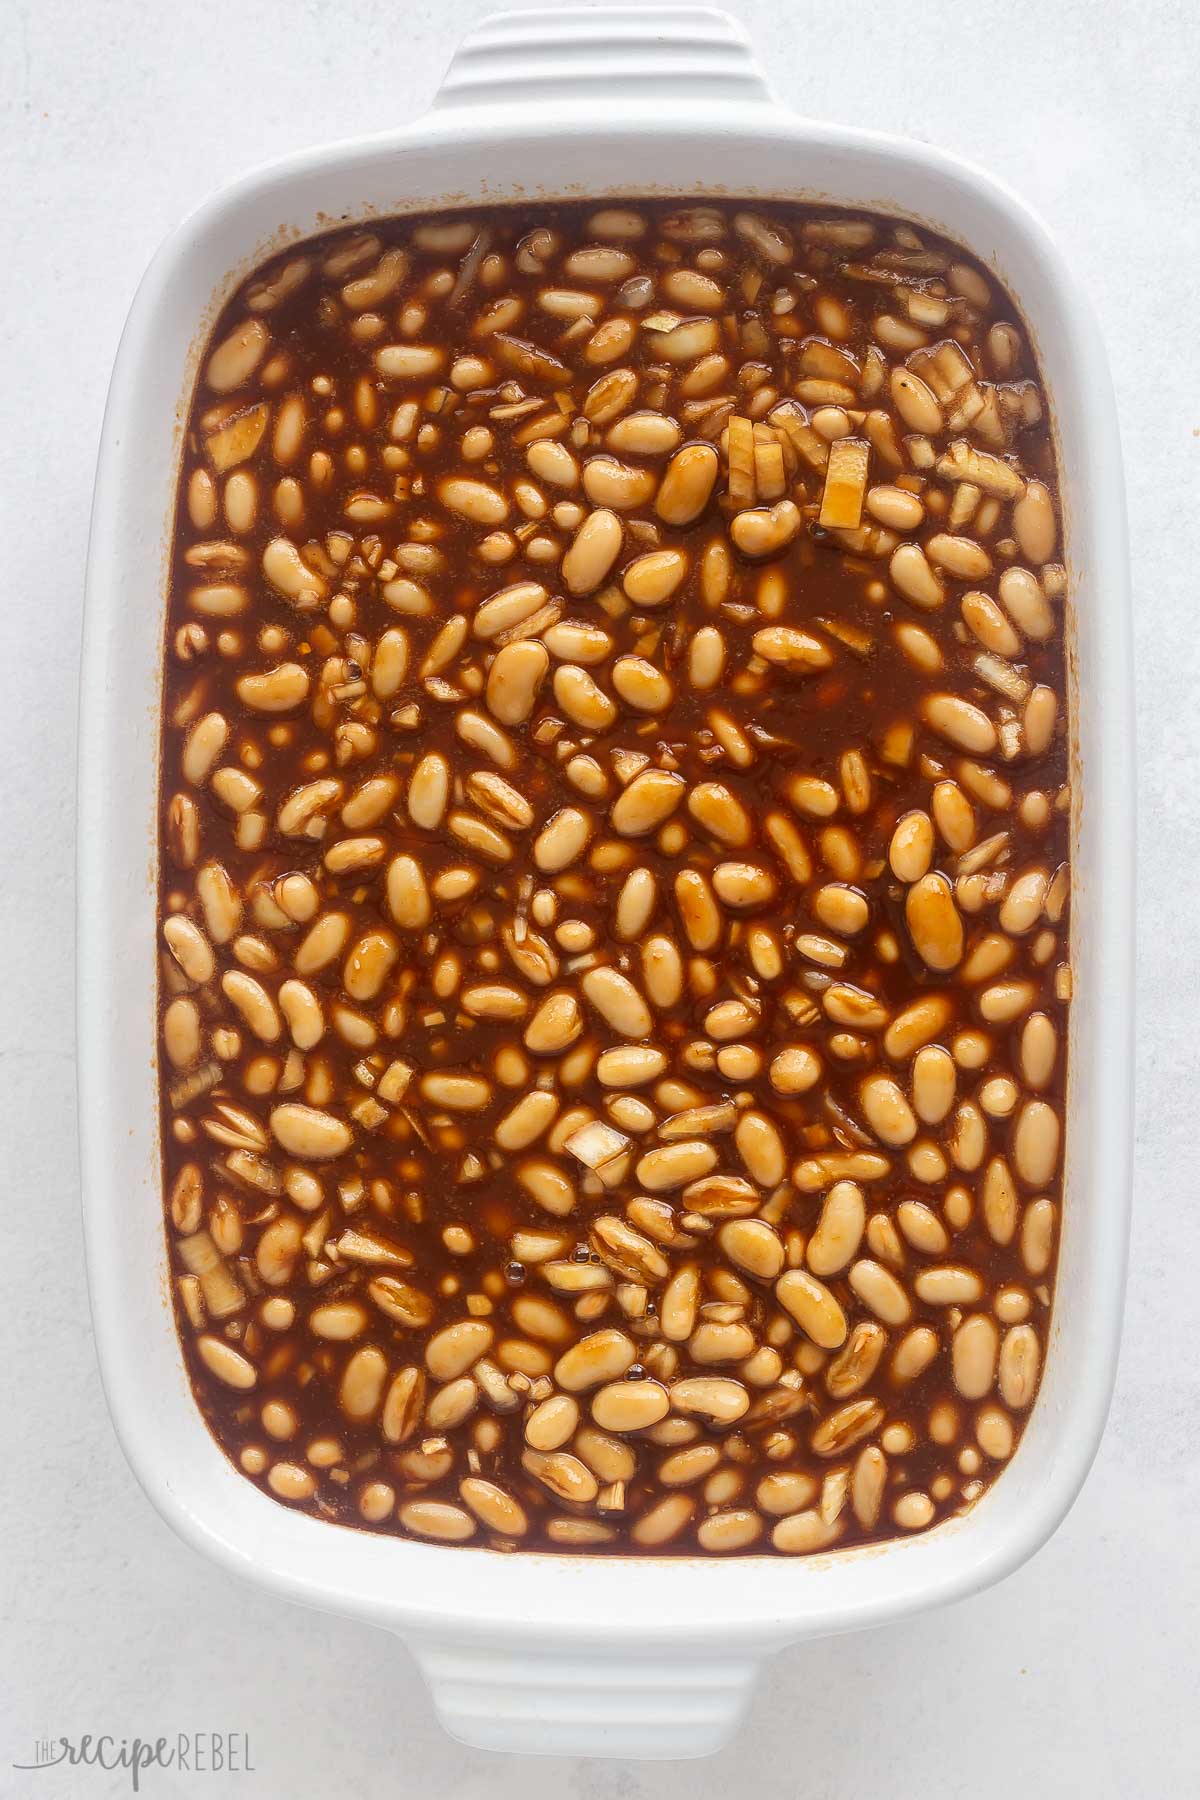 beans and sauce stirred together in white baking dish.